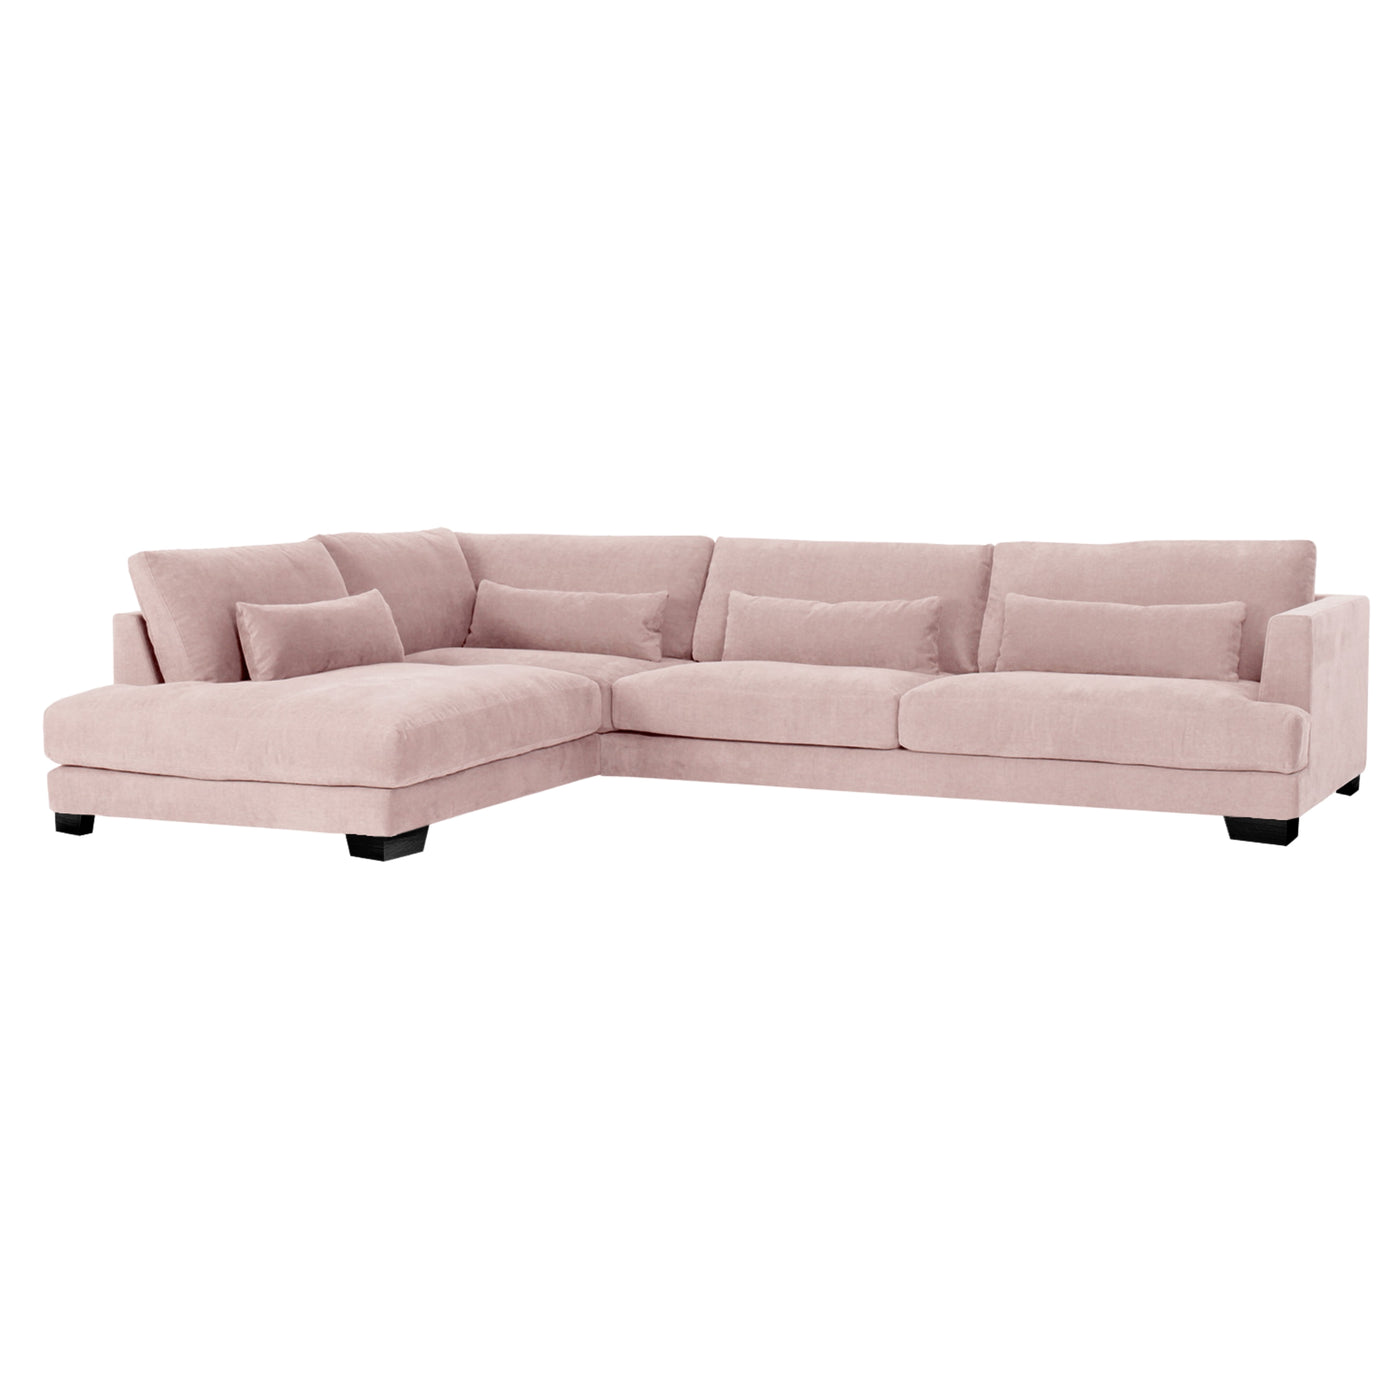 someday designs toft corner sofa in pure 04 nude pink with black legs LHF. #colour_pure-04-nude-pink